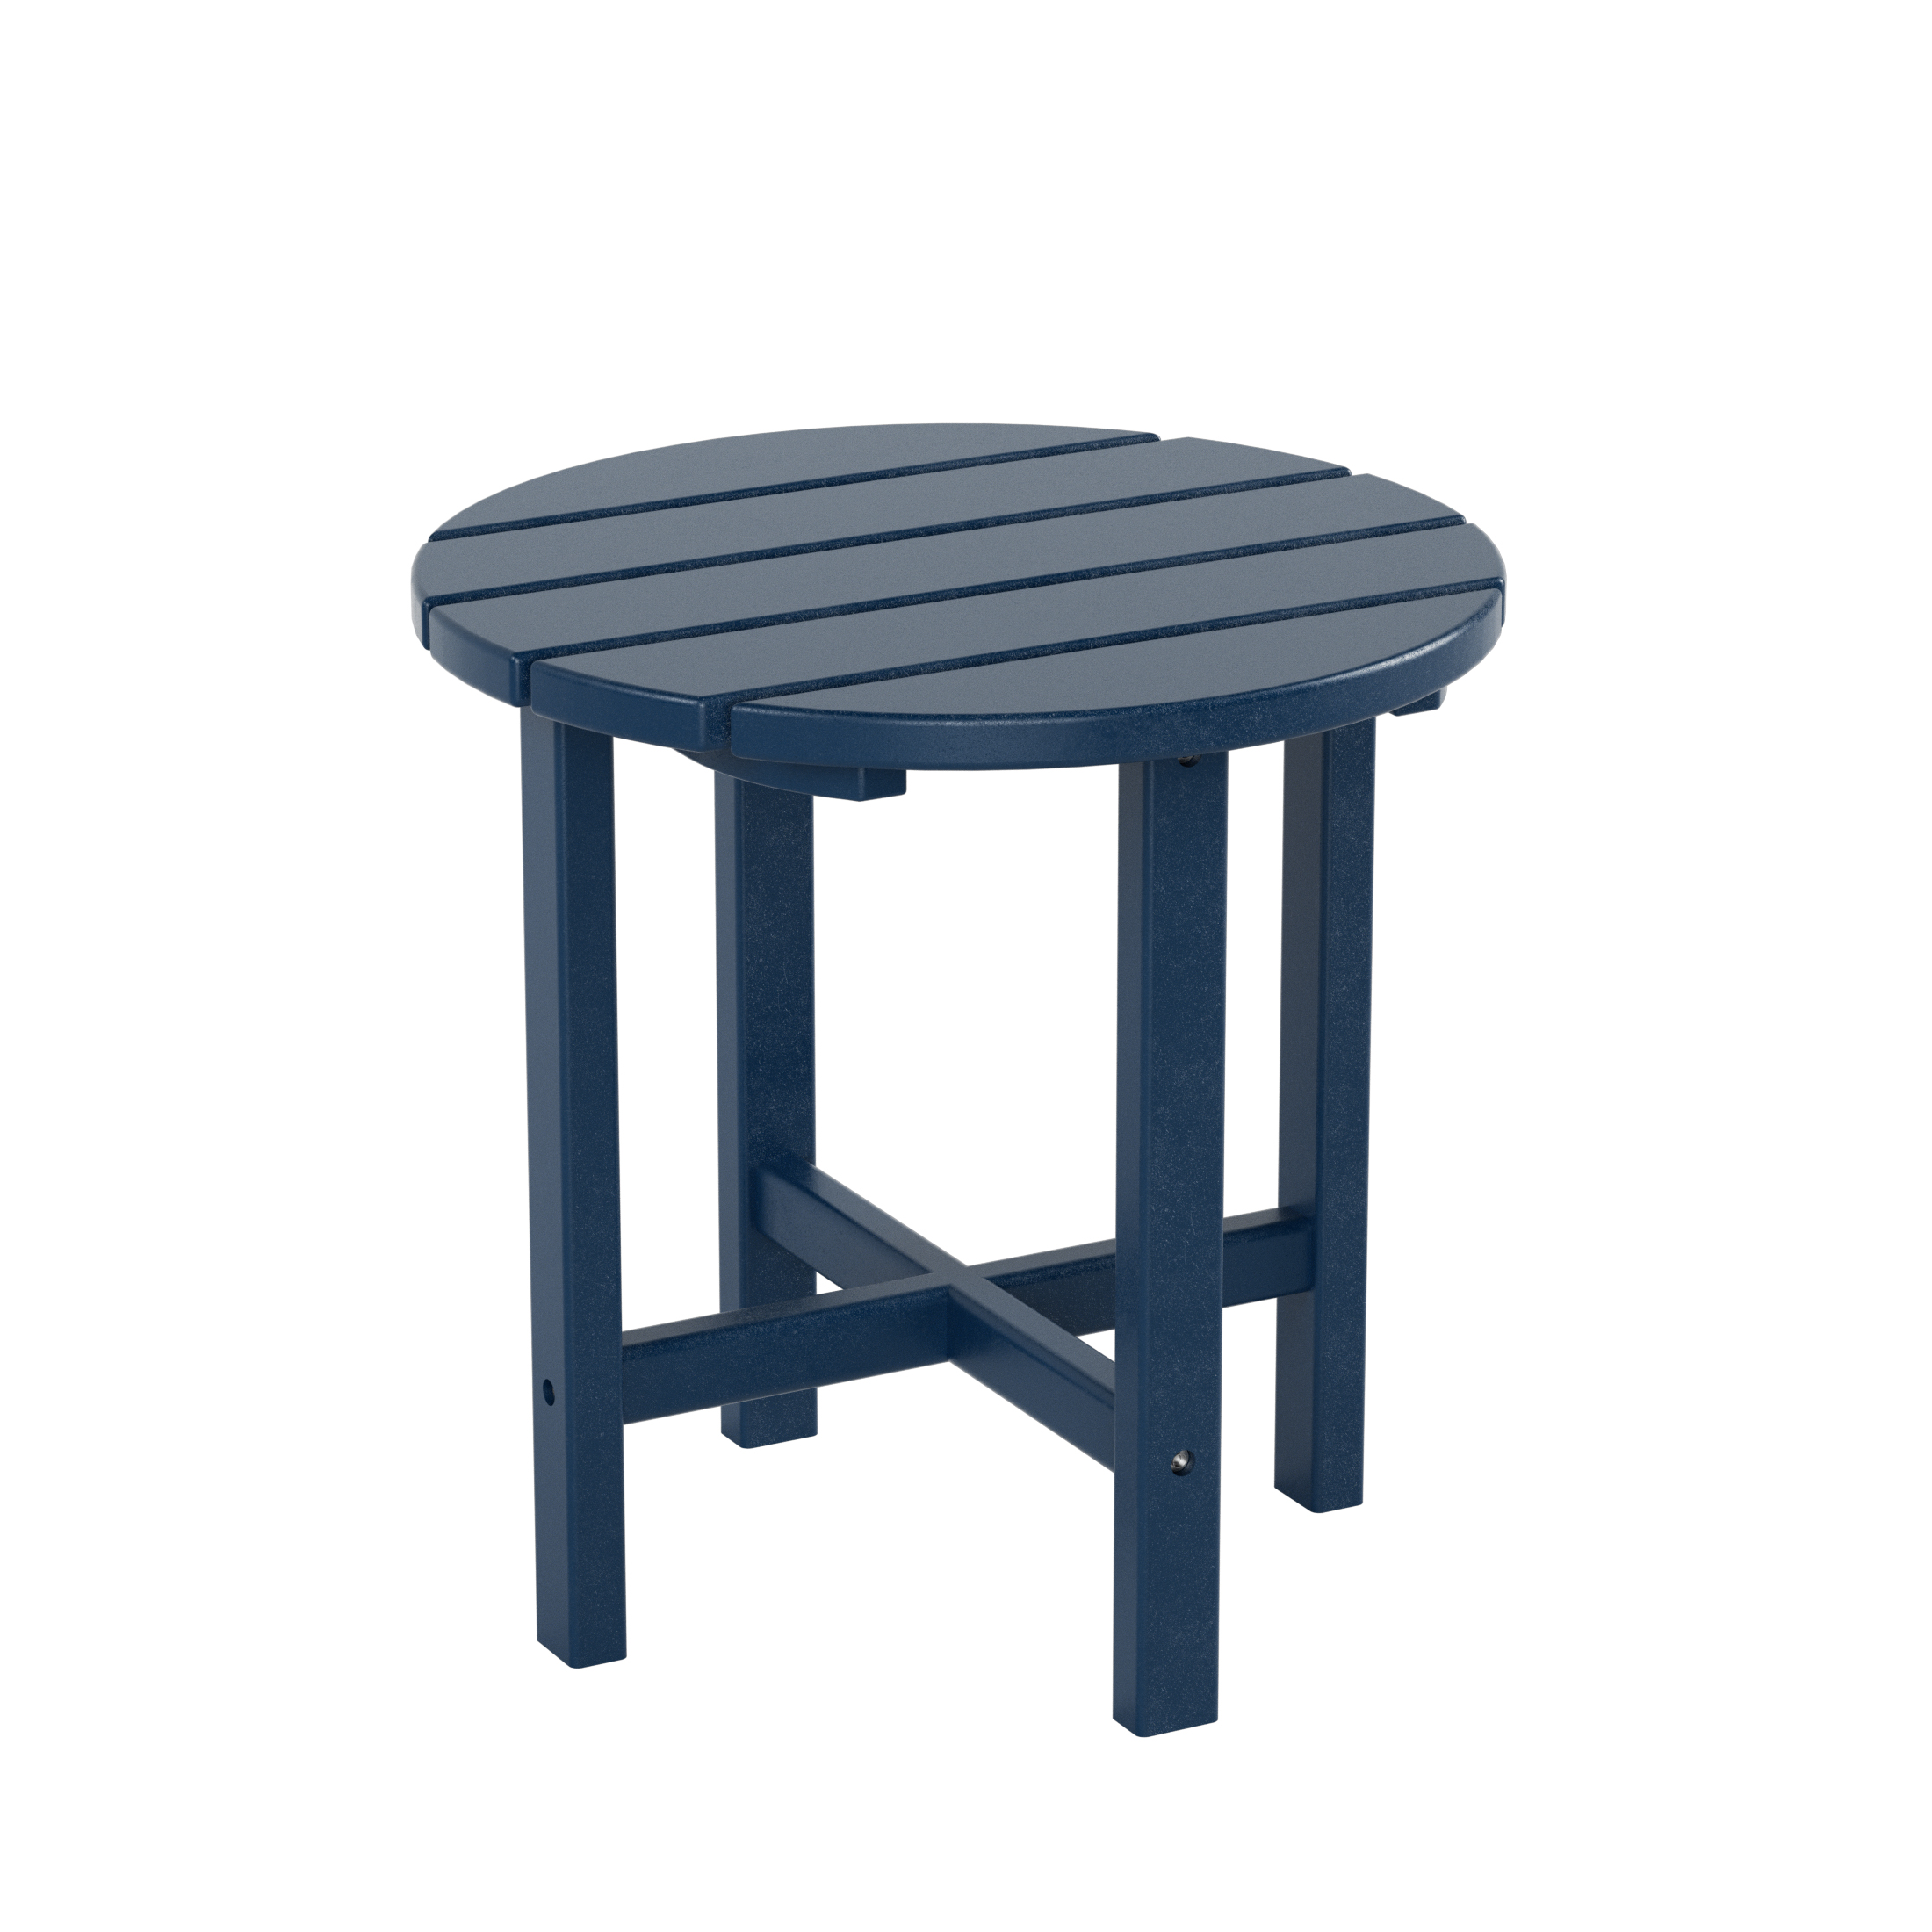 GARDEN 2-Piece Set Classic Plastic Porch Rocking Chair with Round Side Table Included, Navy Blue - image 3 of 7